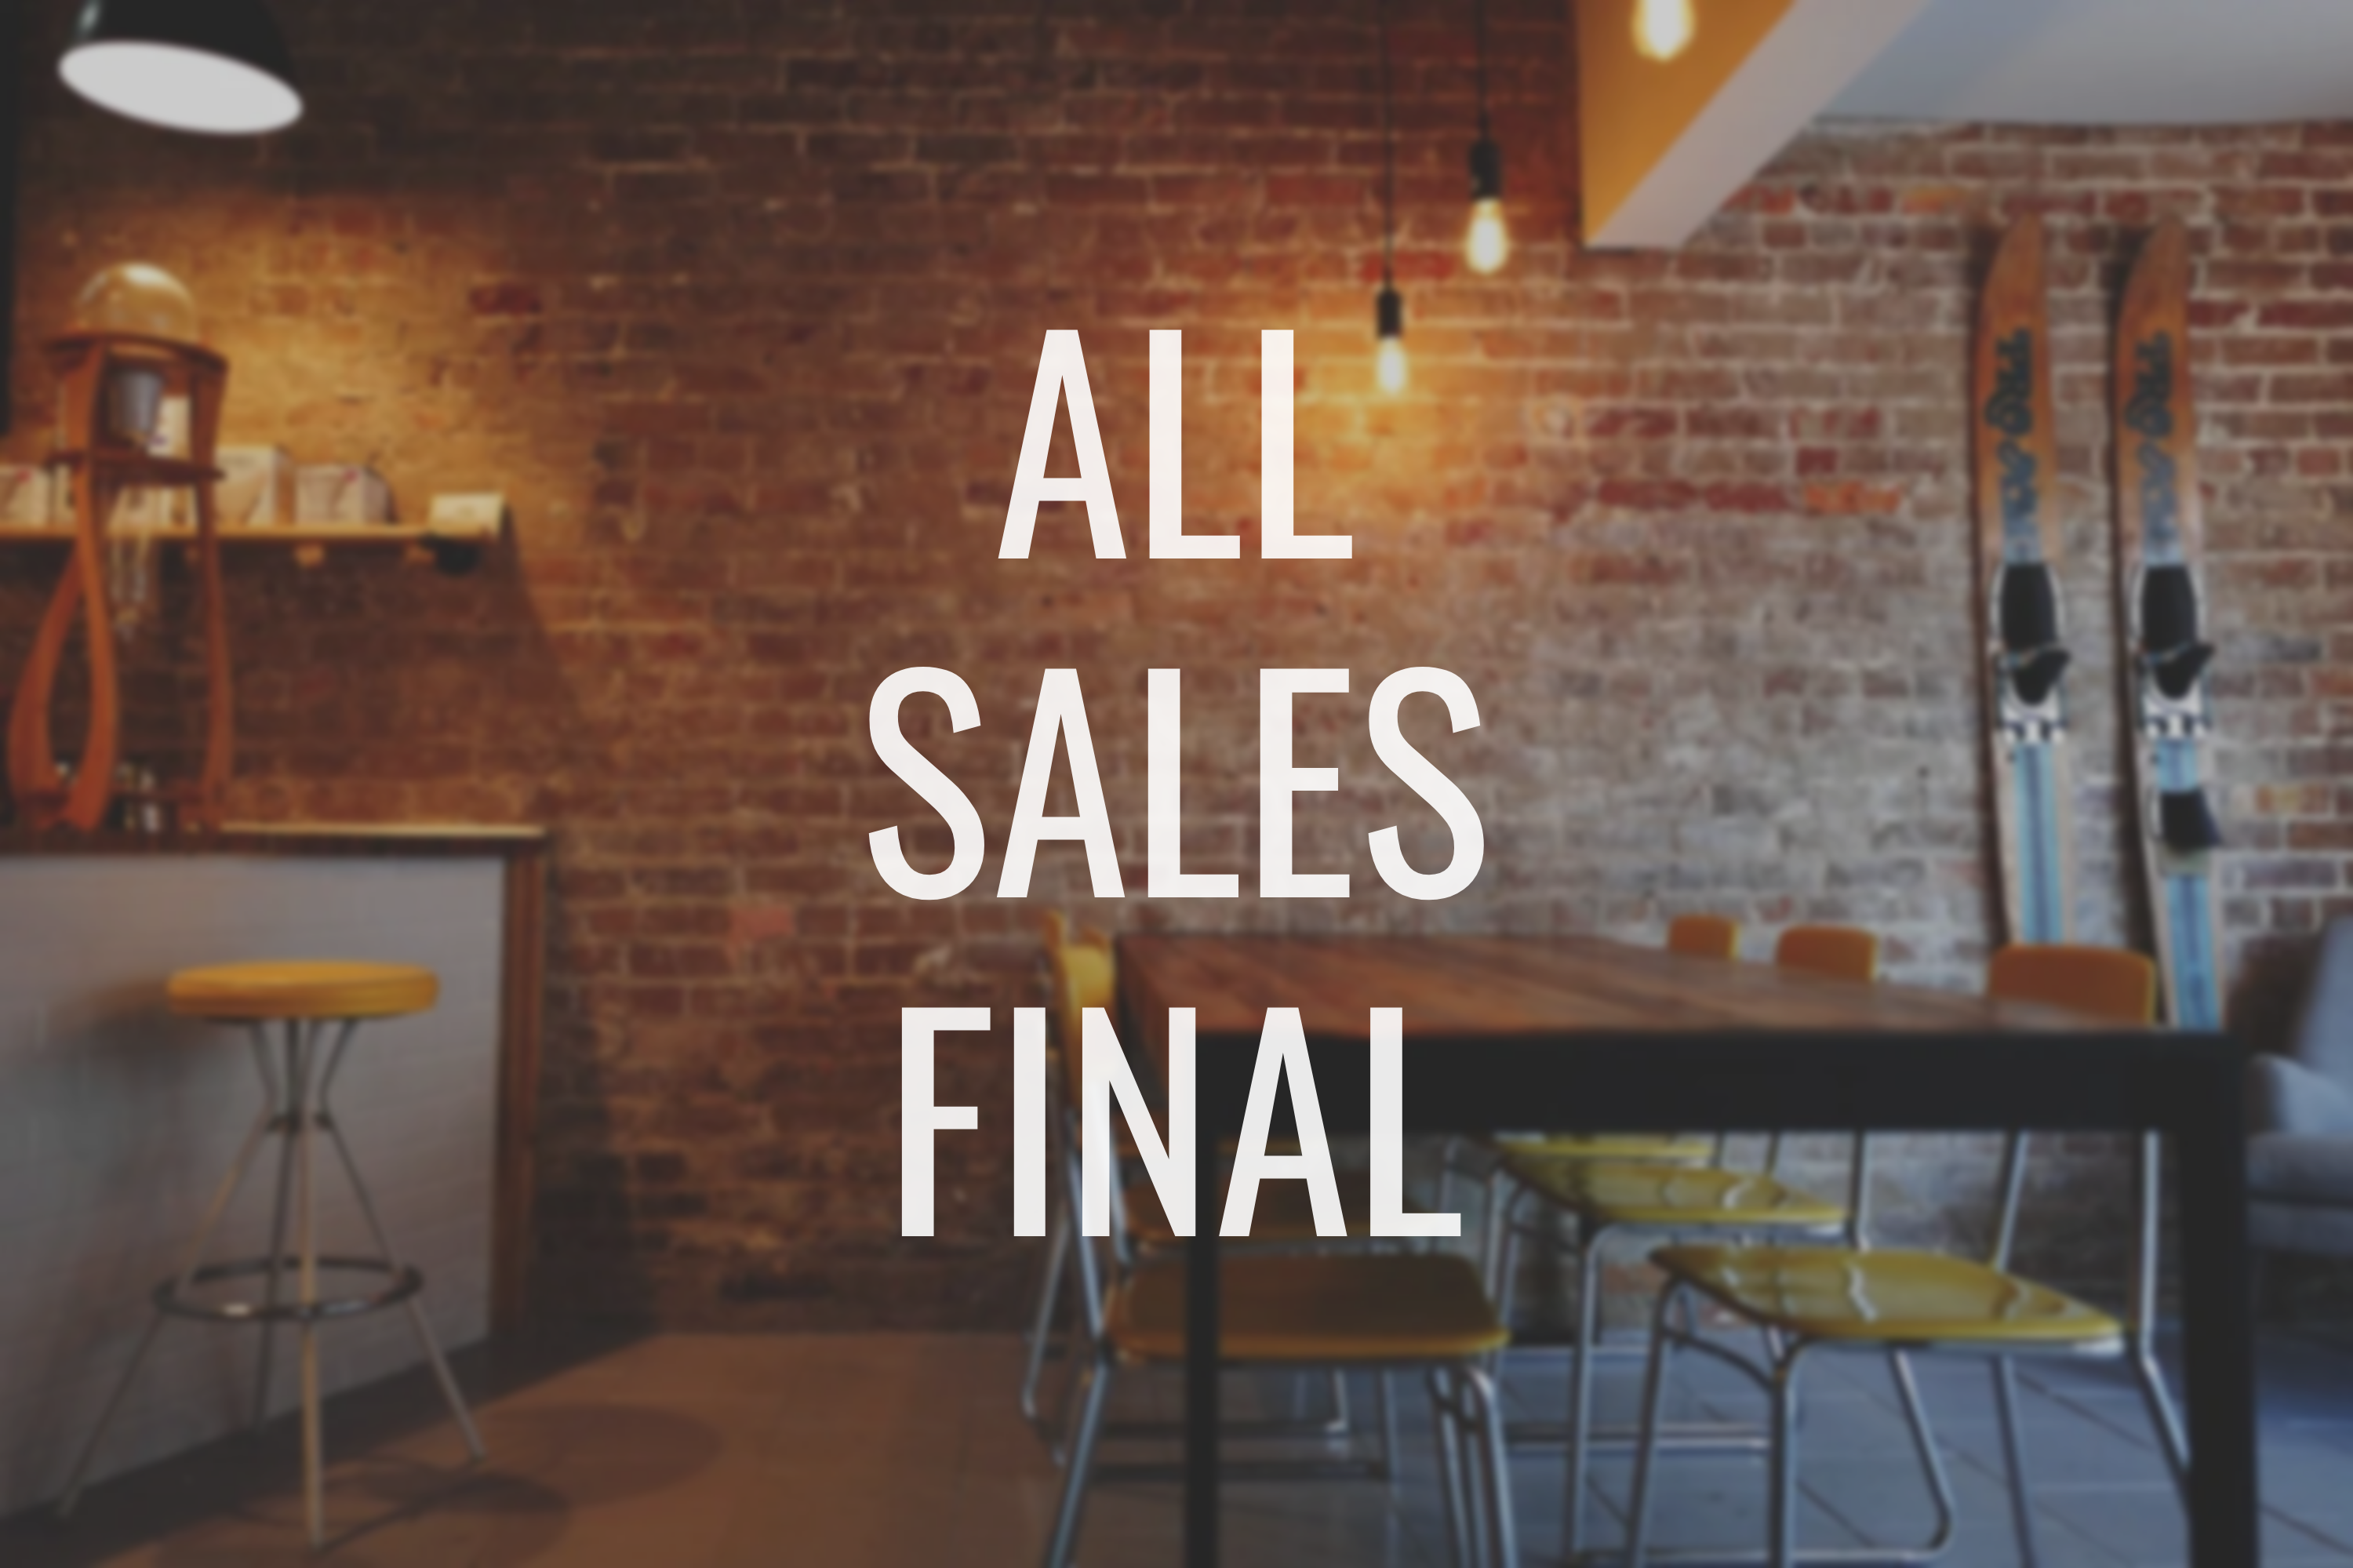 All Sales Final Decal - Vinyl Sticker for Businesses, Stores, Bars, Coffee Shops, Eatery, Cafeteria, Food Truck! B1